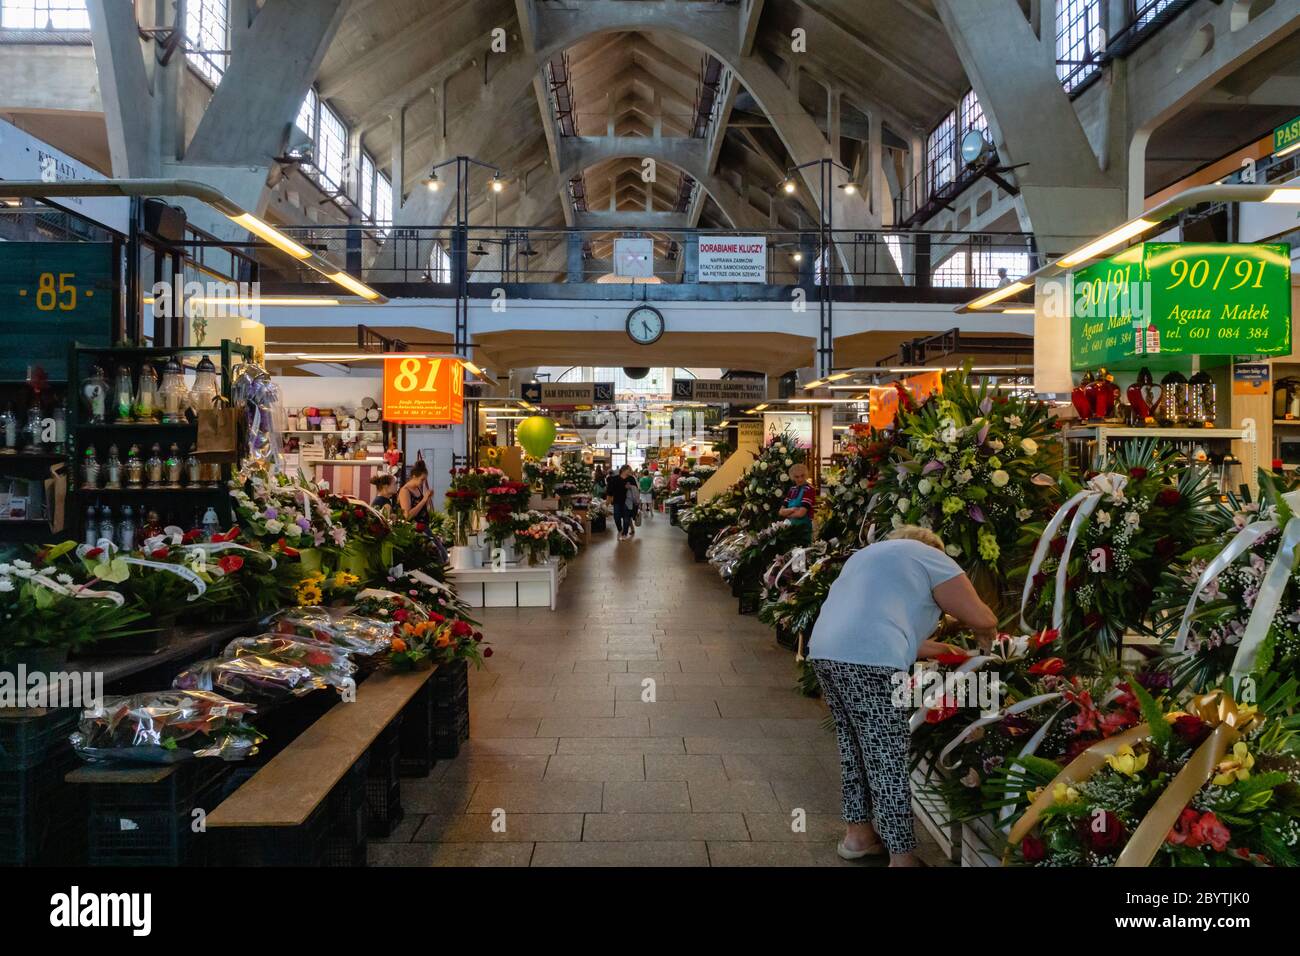 Wroclaw, Poland - August 2019: Wroclaw Market Hall architecture shope - indoor food market located in city center of Wroclaw, near Piaskowa Pier. Stock Photo